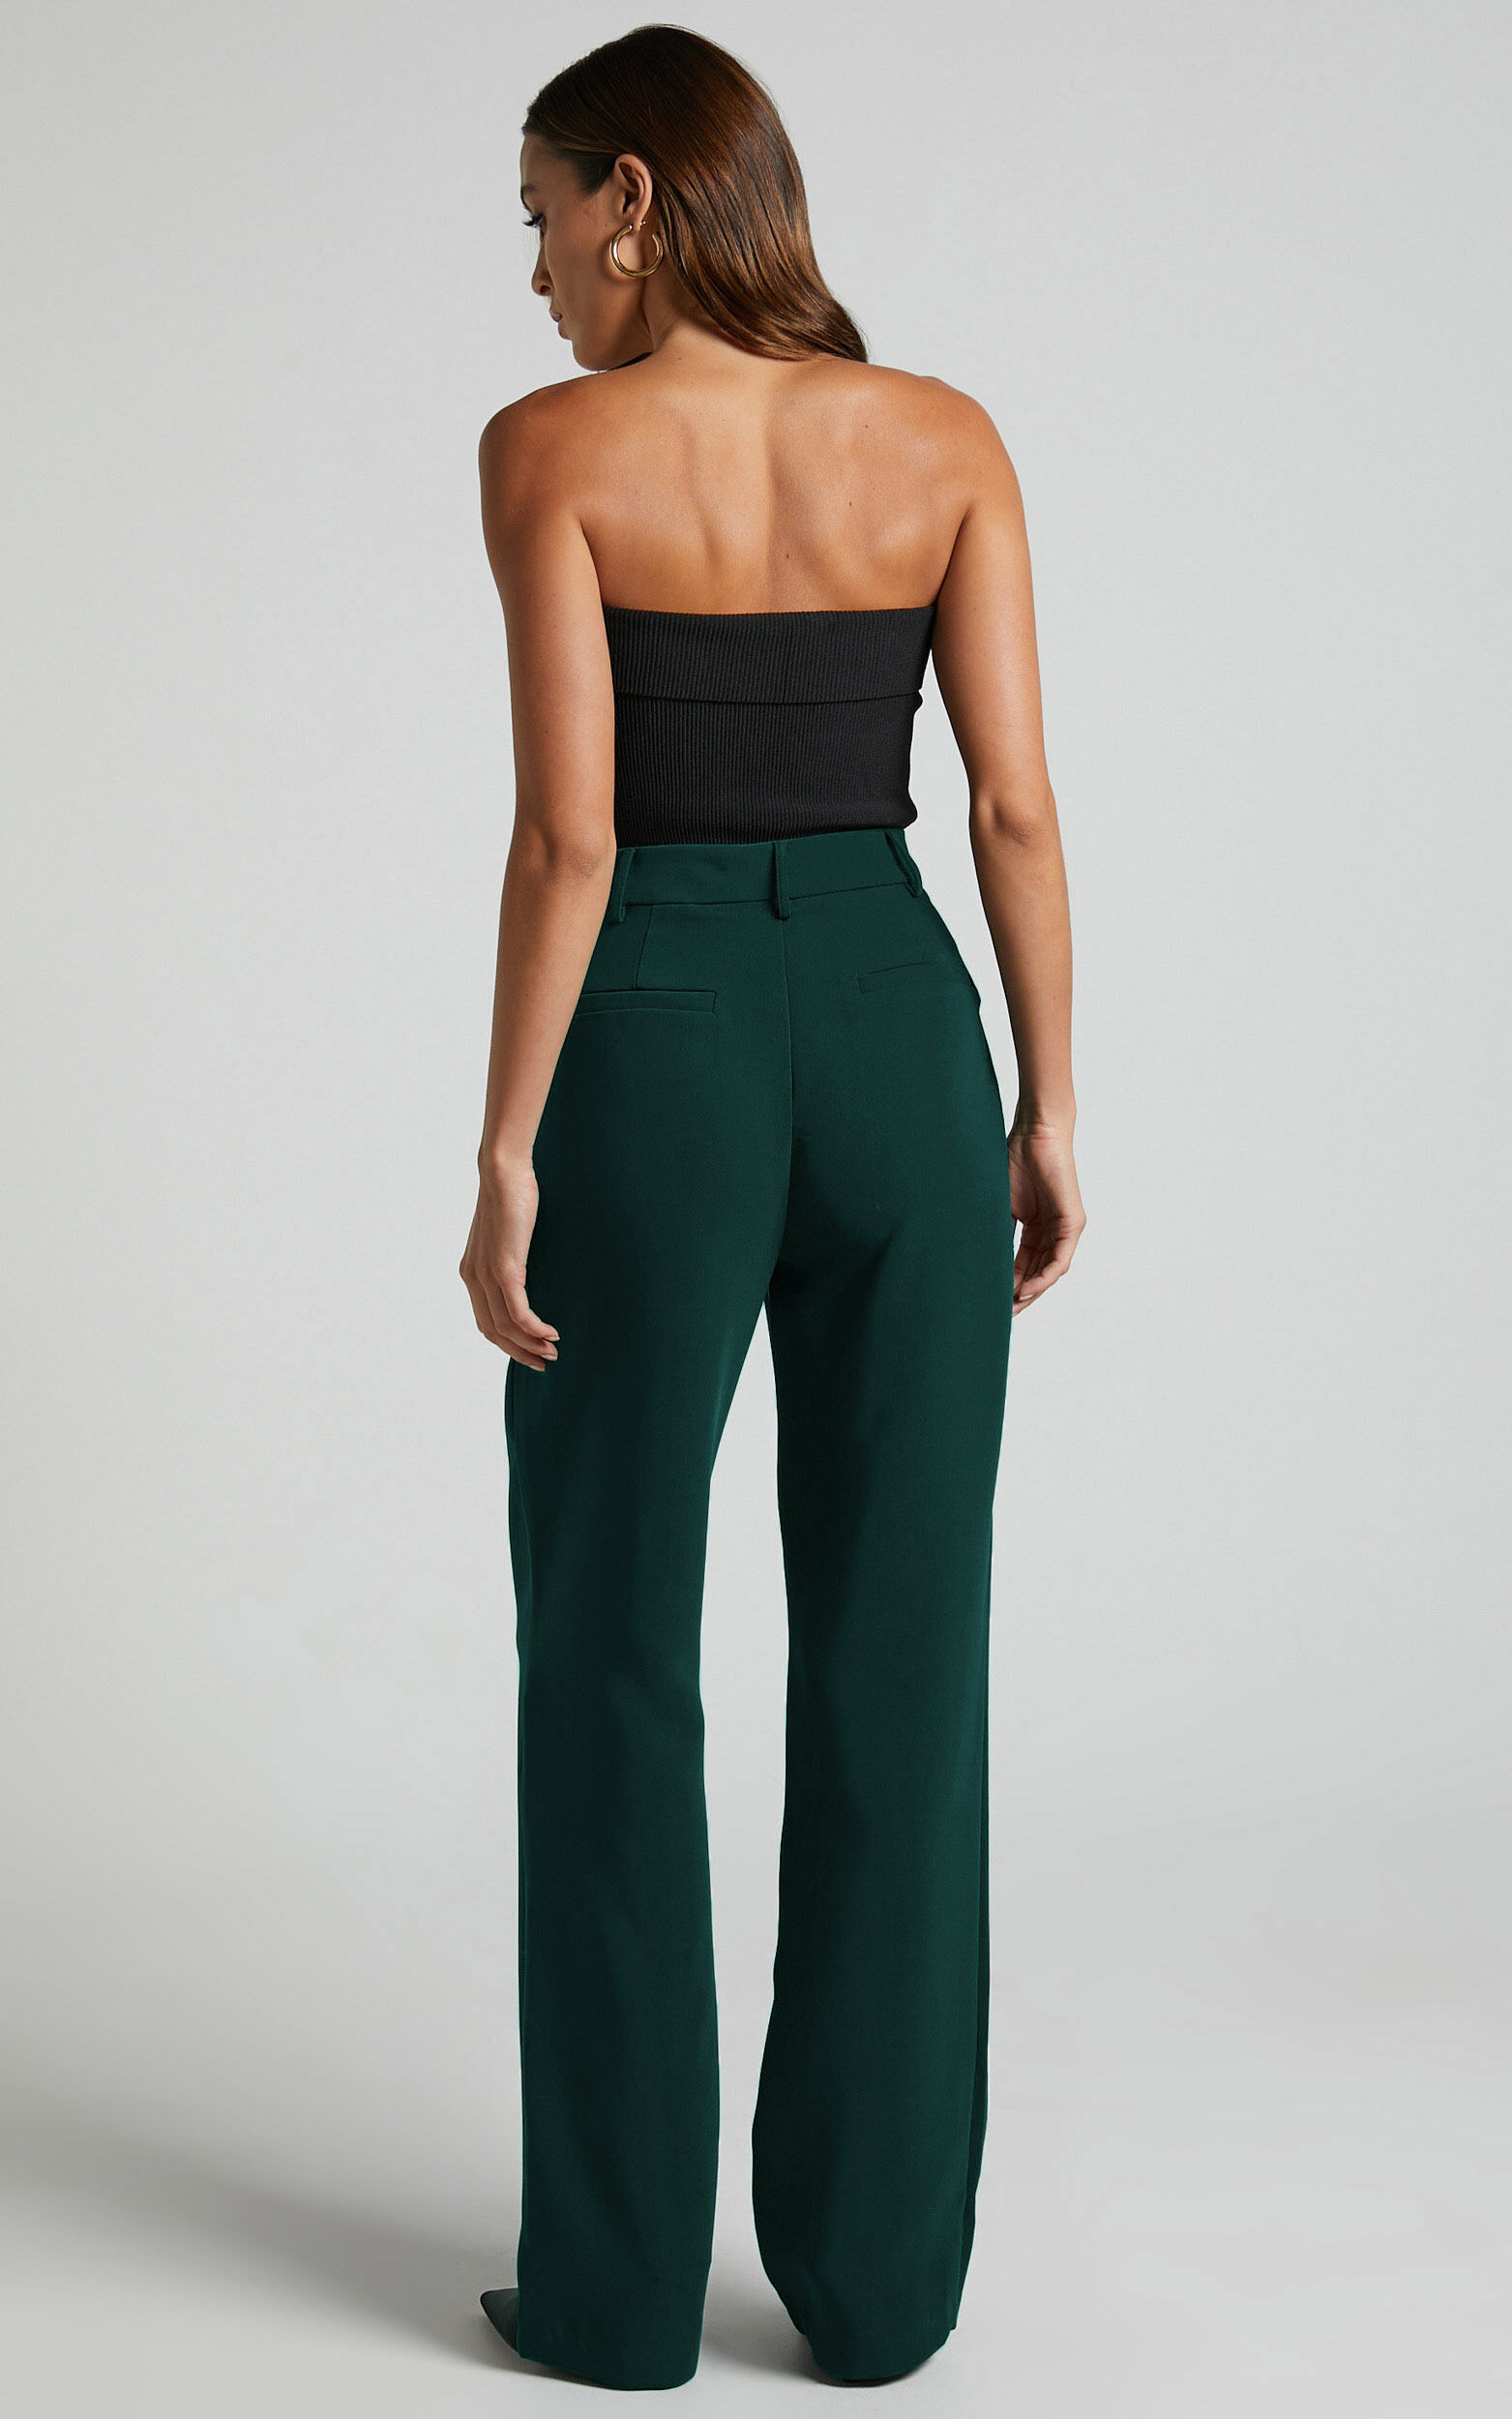 Forest Waisted Green Pants USA Pants Tailored in | High Showpo - Lorcan